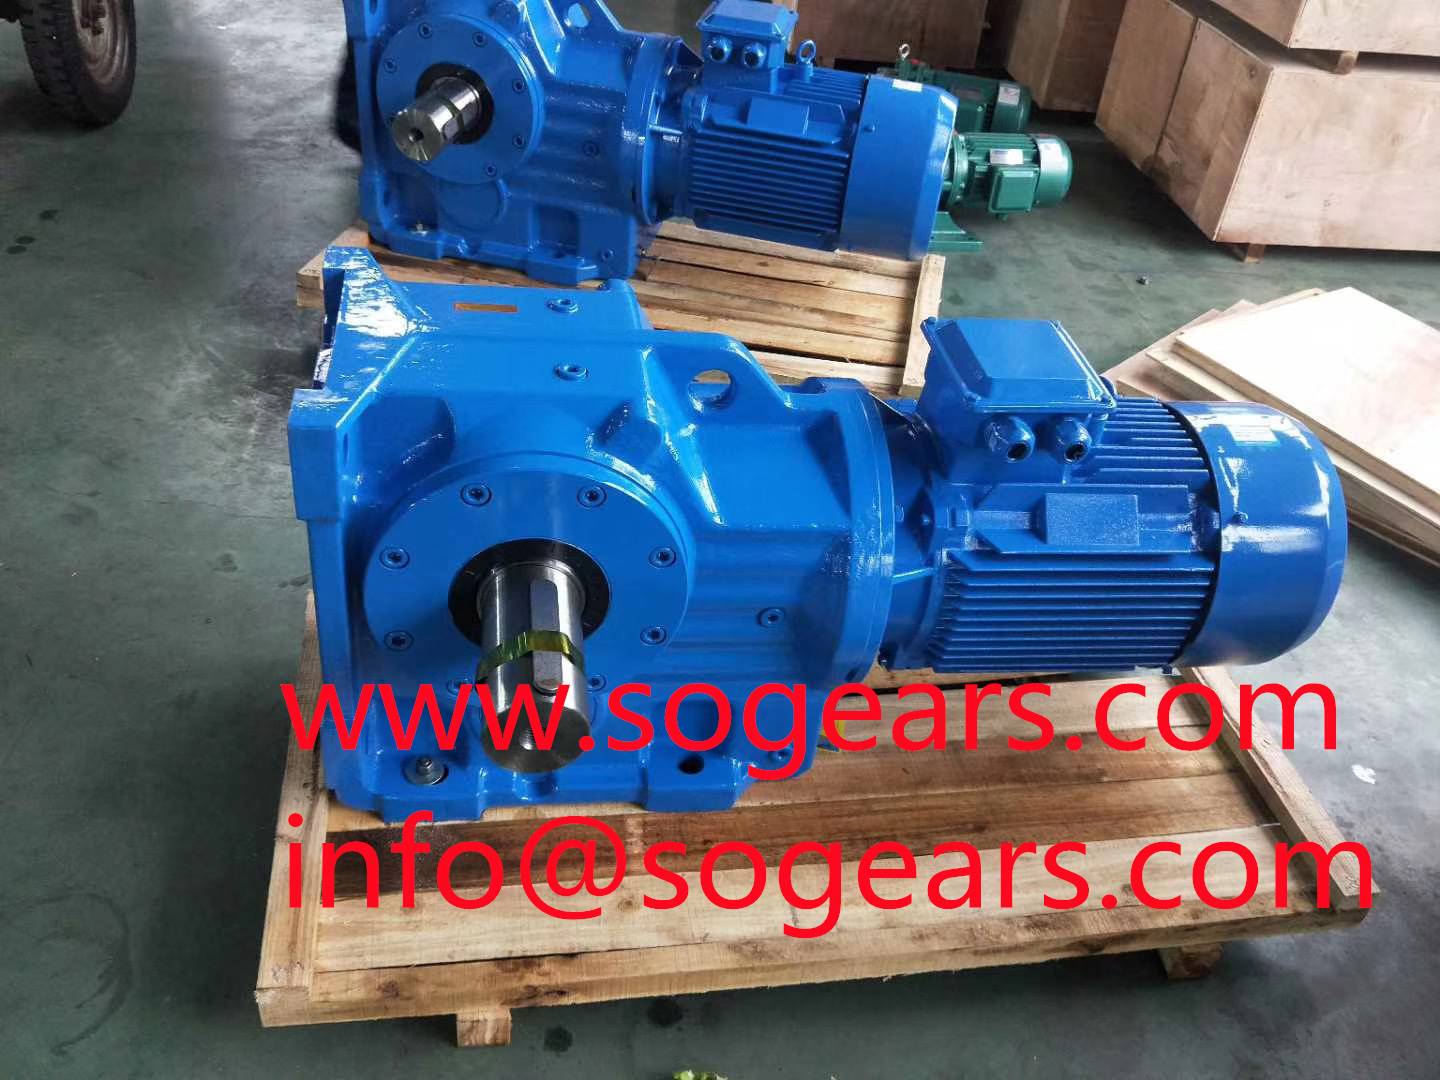 Gearbox and gearbox zlyj 165 transmission